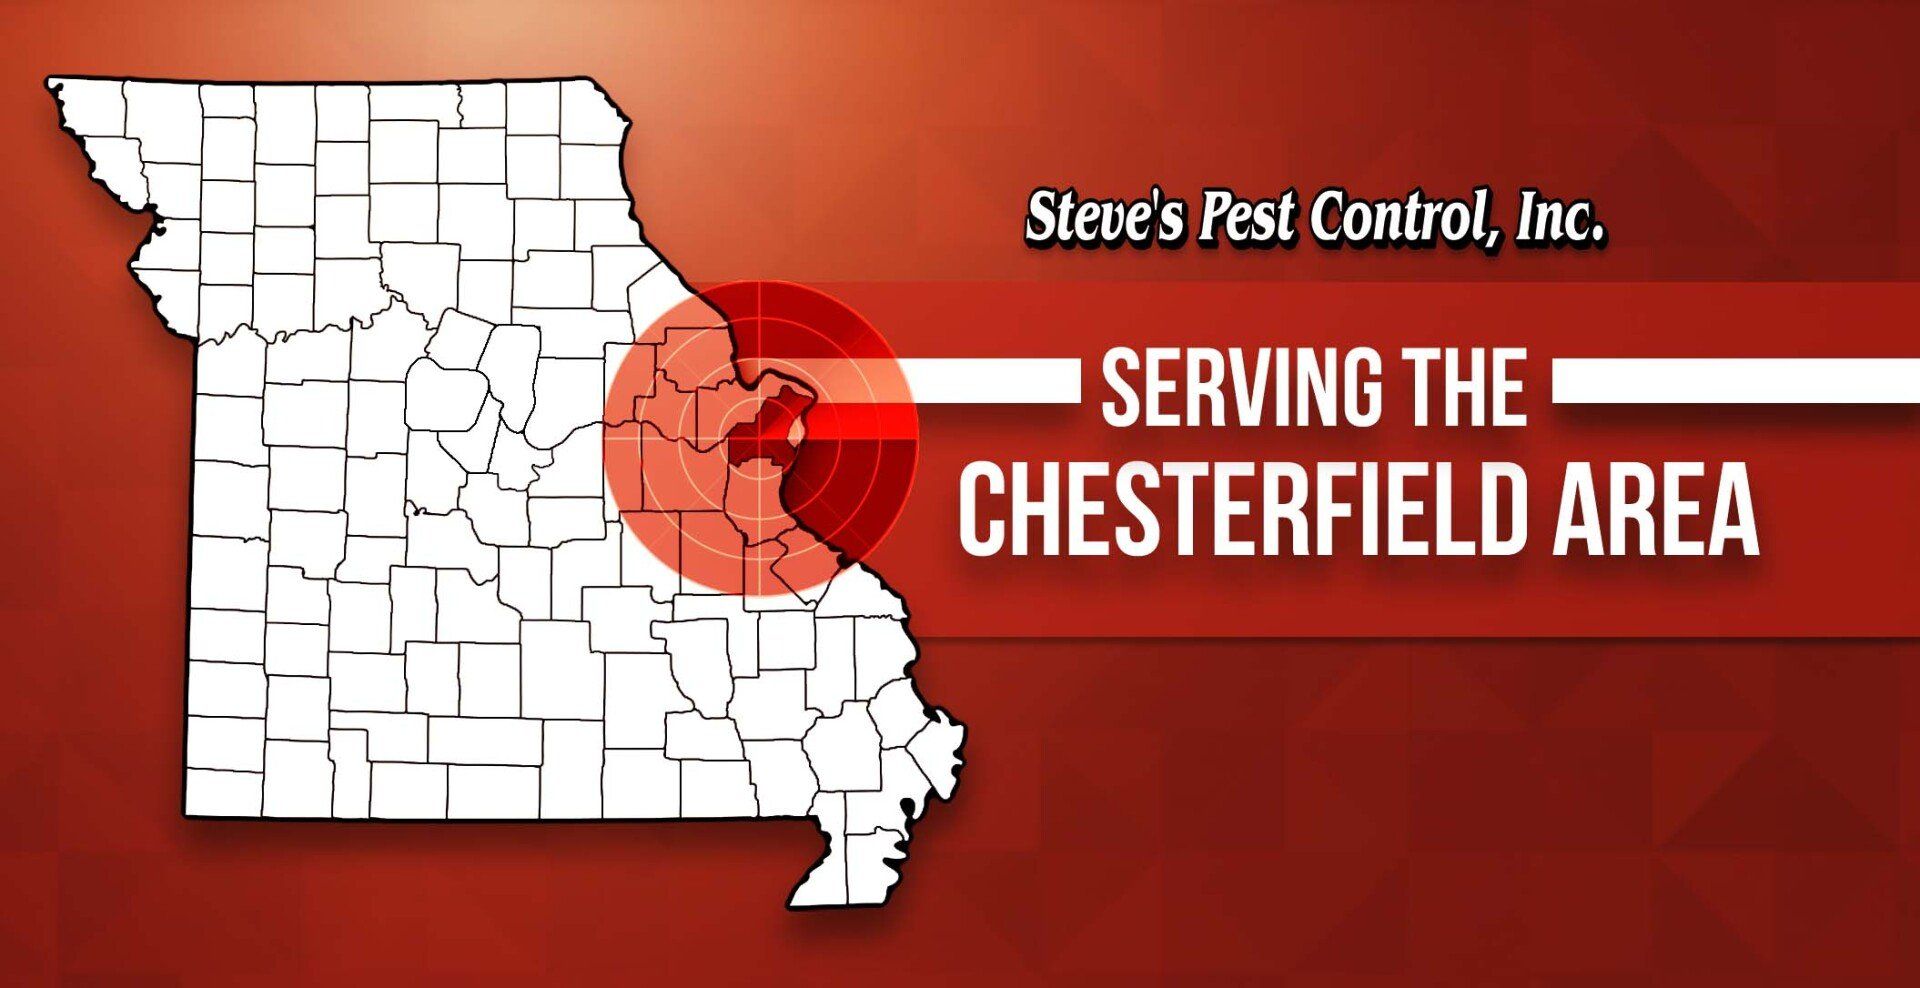 Steve's Pest Control Serves the Chesterfield, MO Area